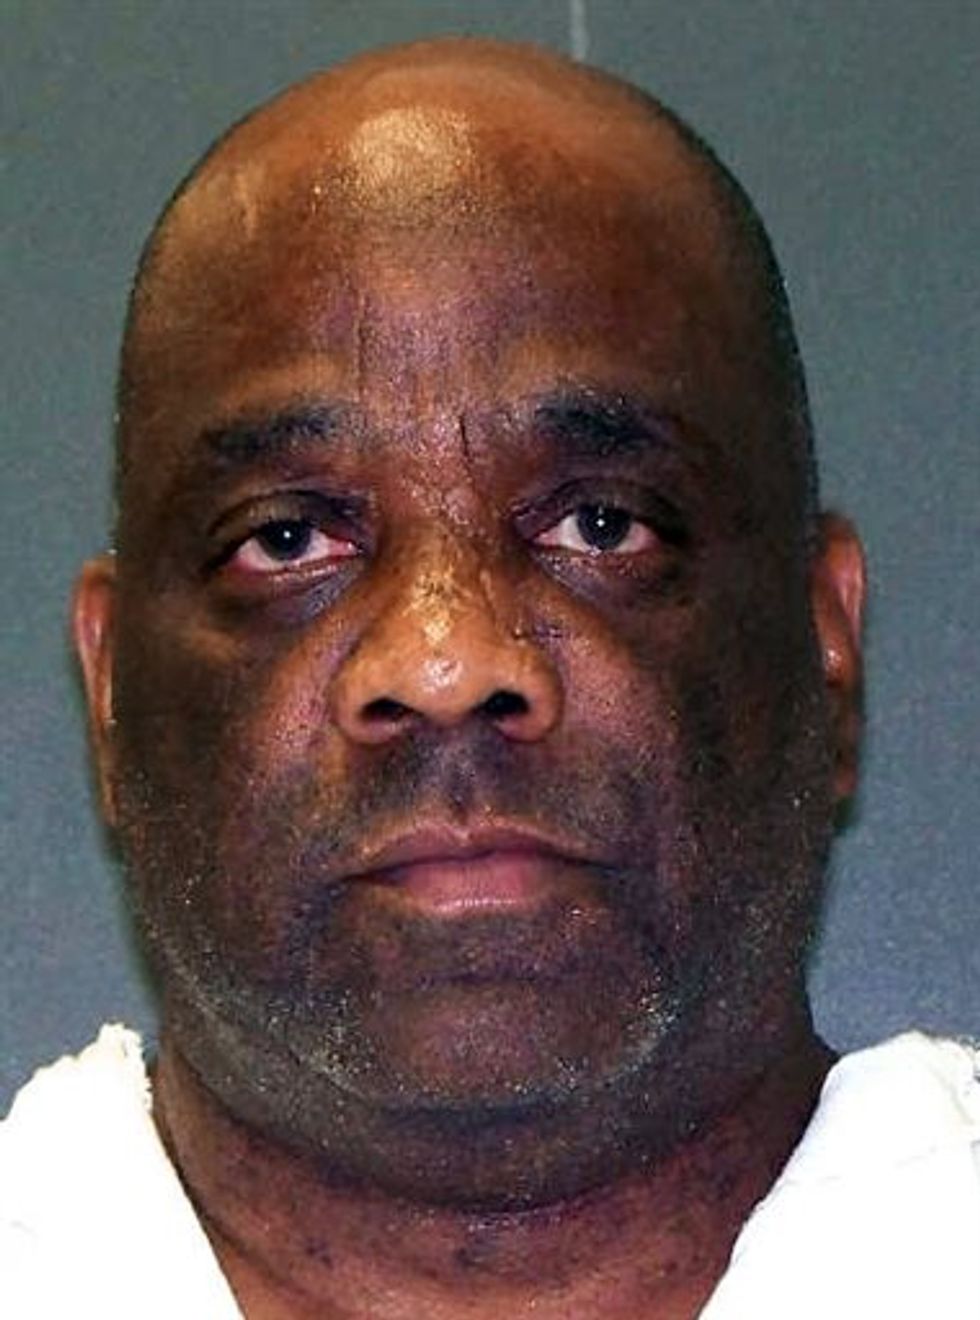 Texas Executes Man for Killing Woman Two Decades Ago While on Parole for Triple Slaying Years Earlier